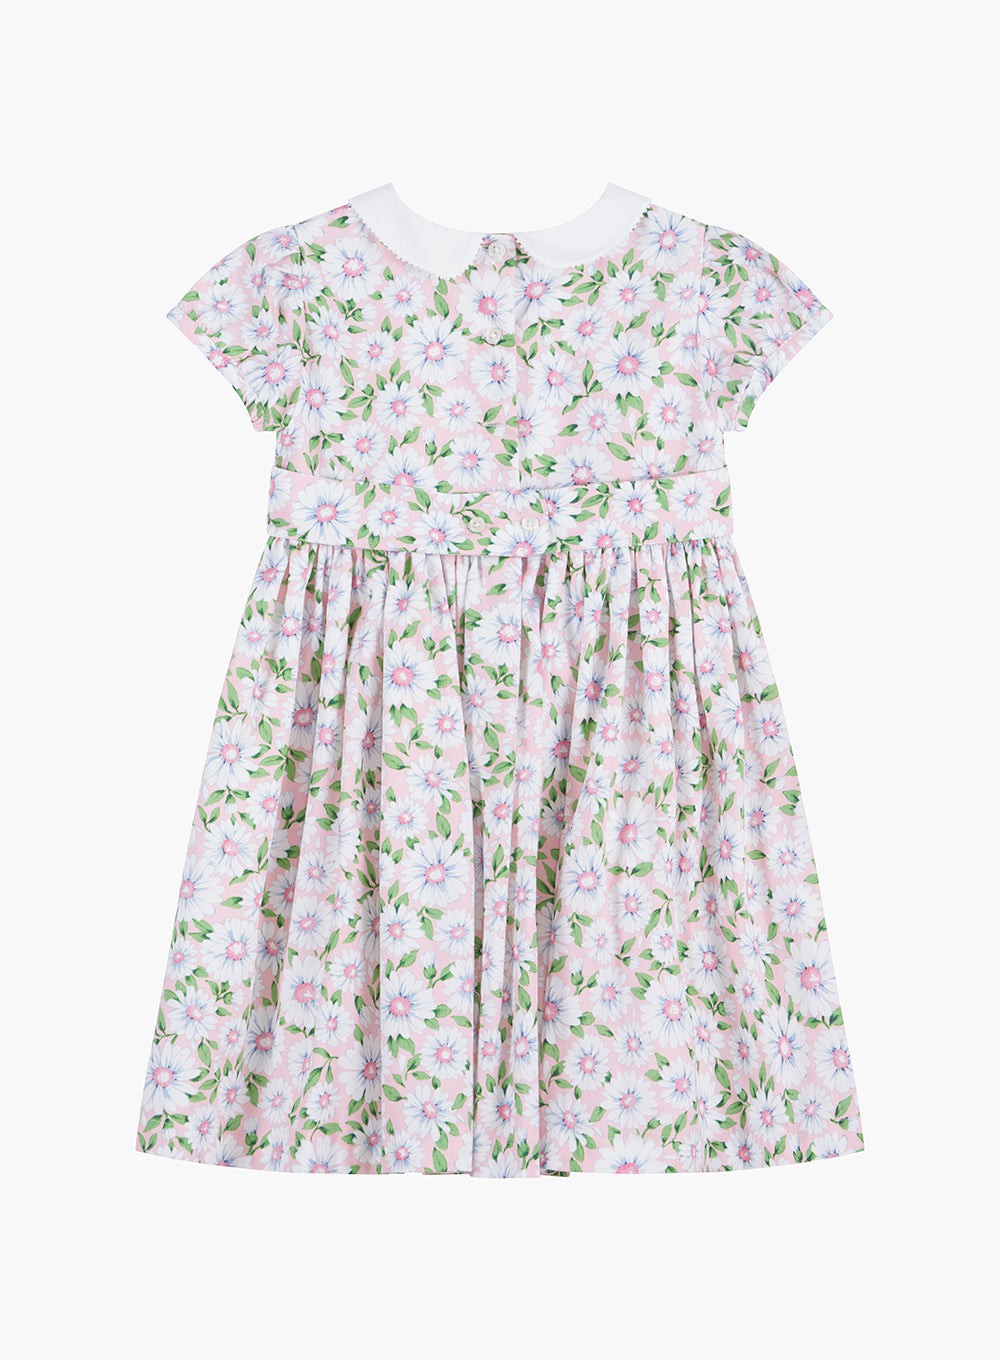 Confiture Dress Catherine Daisy Dress in Pink Daisy